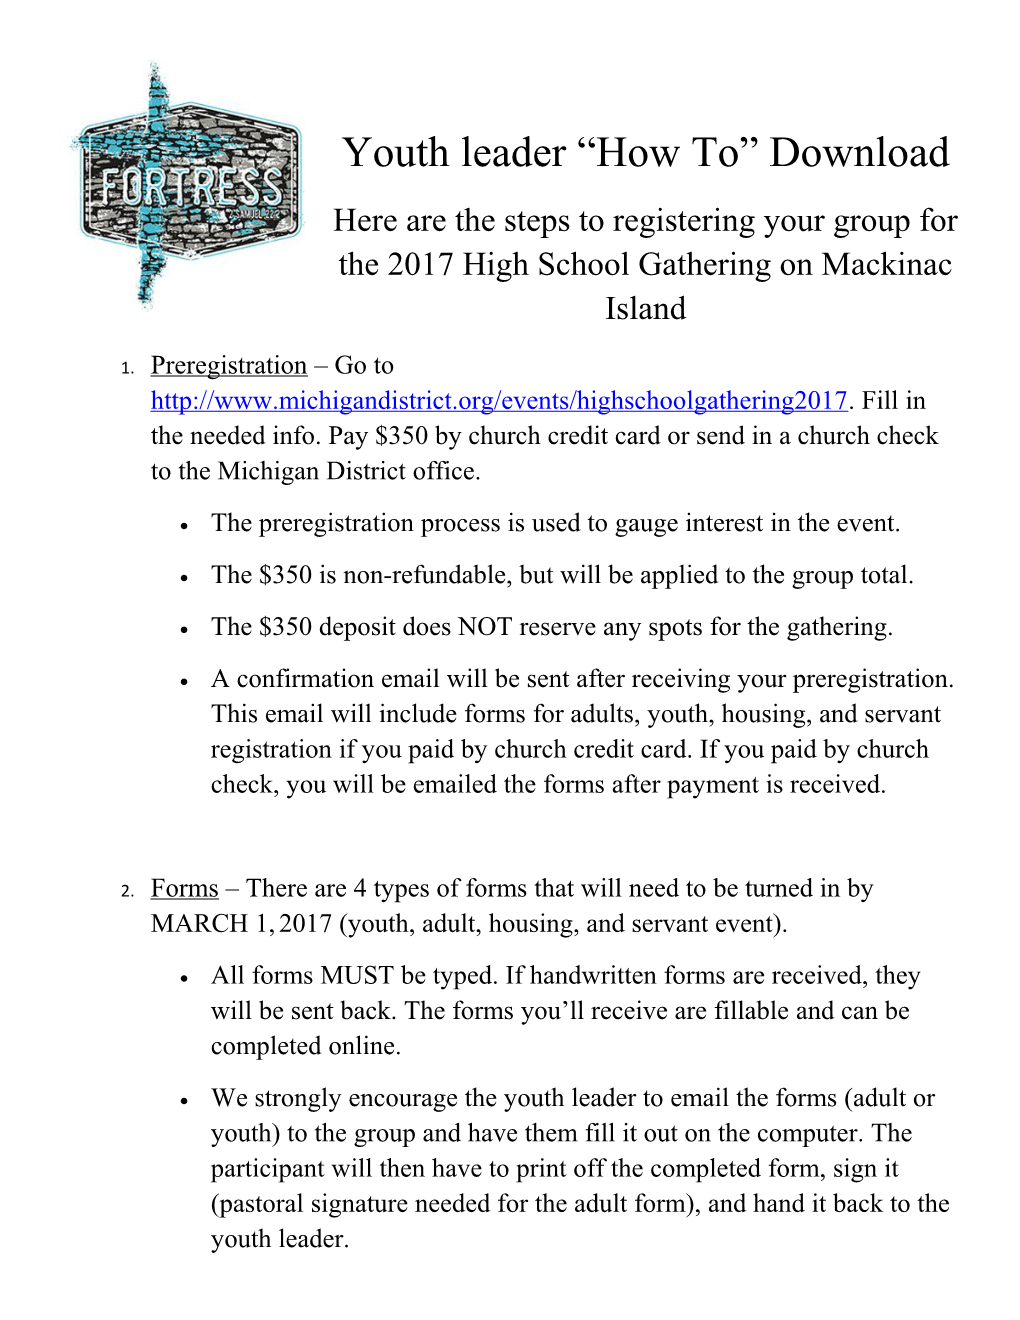 Here Are the Steps to Registering Your Group for the 2017 High School Gathering on Mackinac